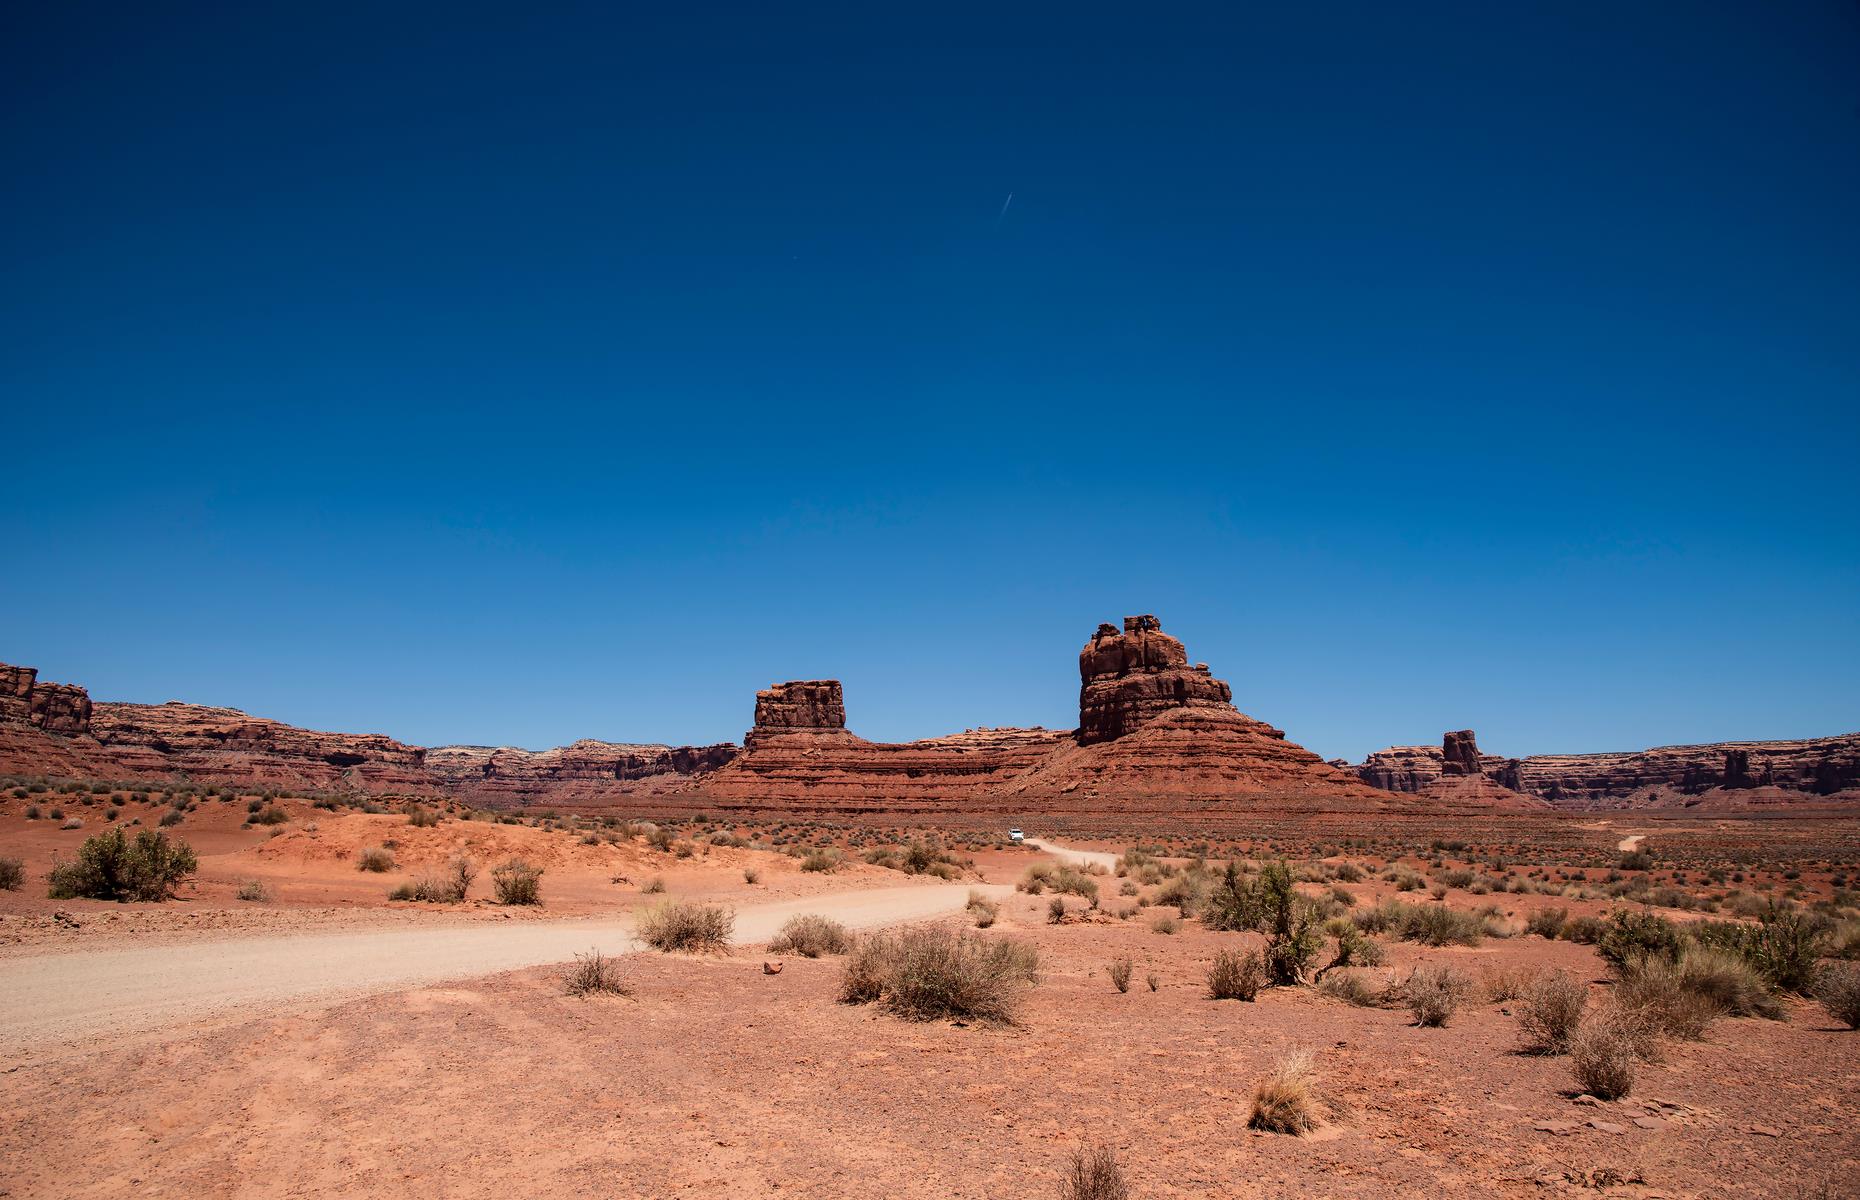 <p>A 17-mile (27km) dirt and gravel road loops through the <a href="https://utah.com/monument-valley/valley-of-the-gods">Valley of the Gods</a>, passing flat-topped buttes and spindly spires and rewarding road-trippers with views of apricot, peach and rose-tinged rock that stretch for miles. The road is bumpy and steep in places, so you may need a 4x4 in wet conditions. Otherwise, just take a full tank of petrol, some snacks and a sense of adventure.</p>